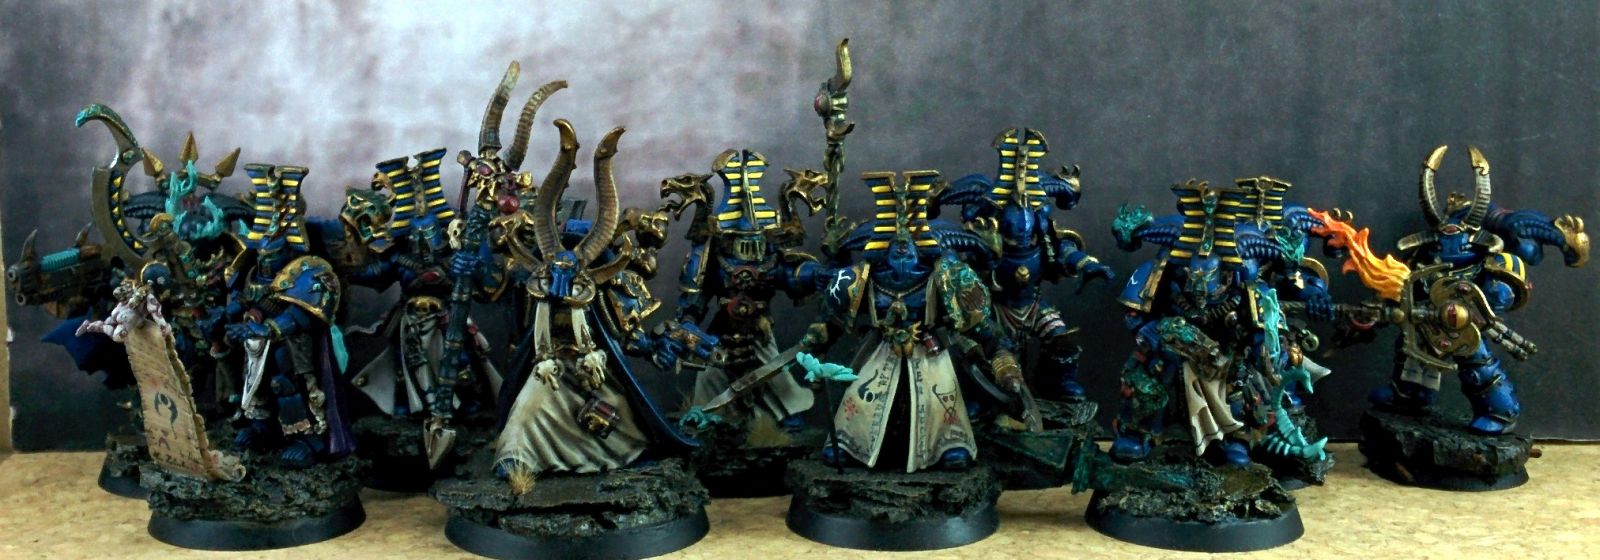 Thousand Sons Sorcerer Coven 2015